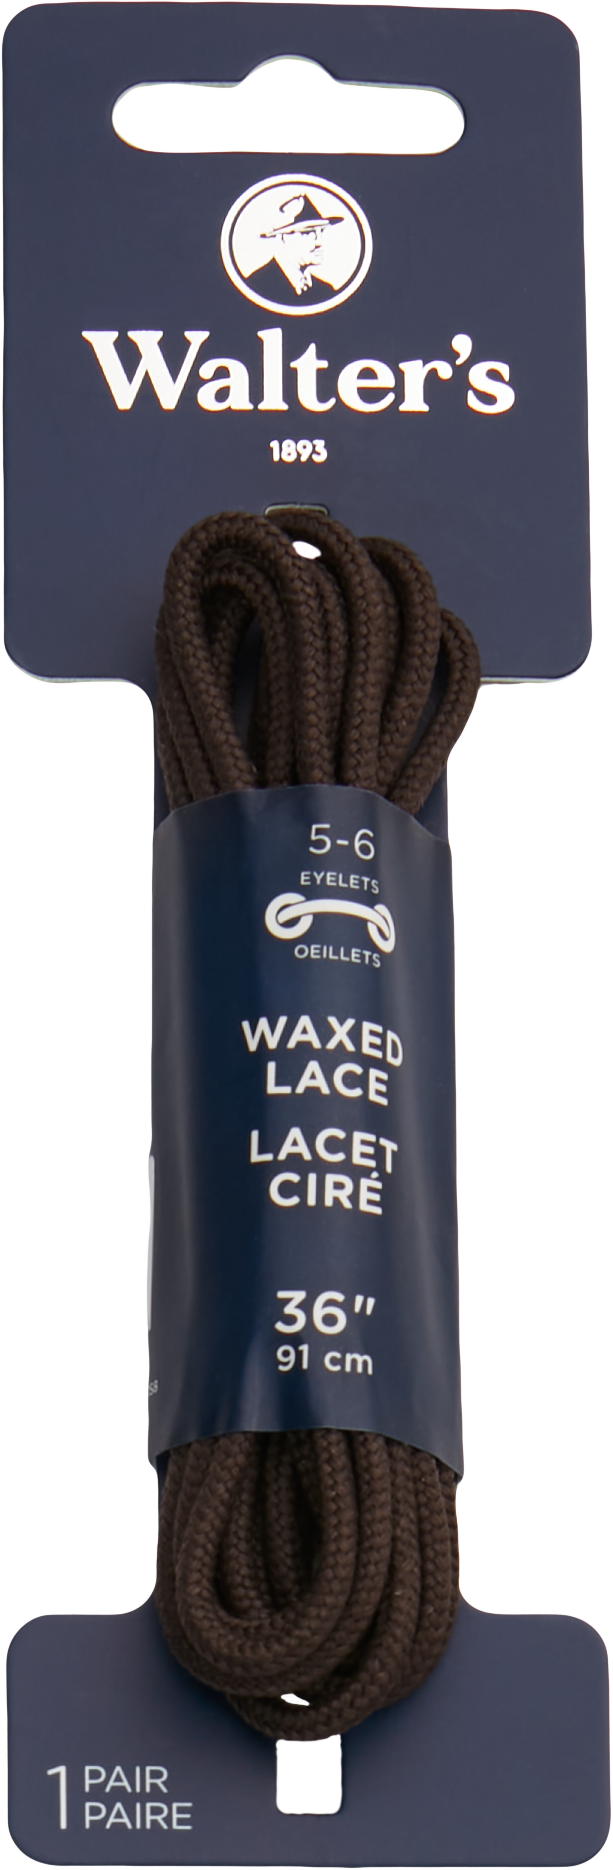 36-Inch Wax Dress Laces